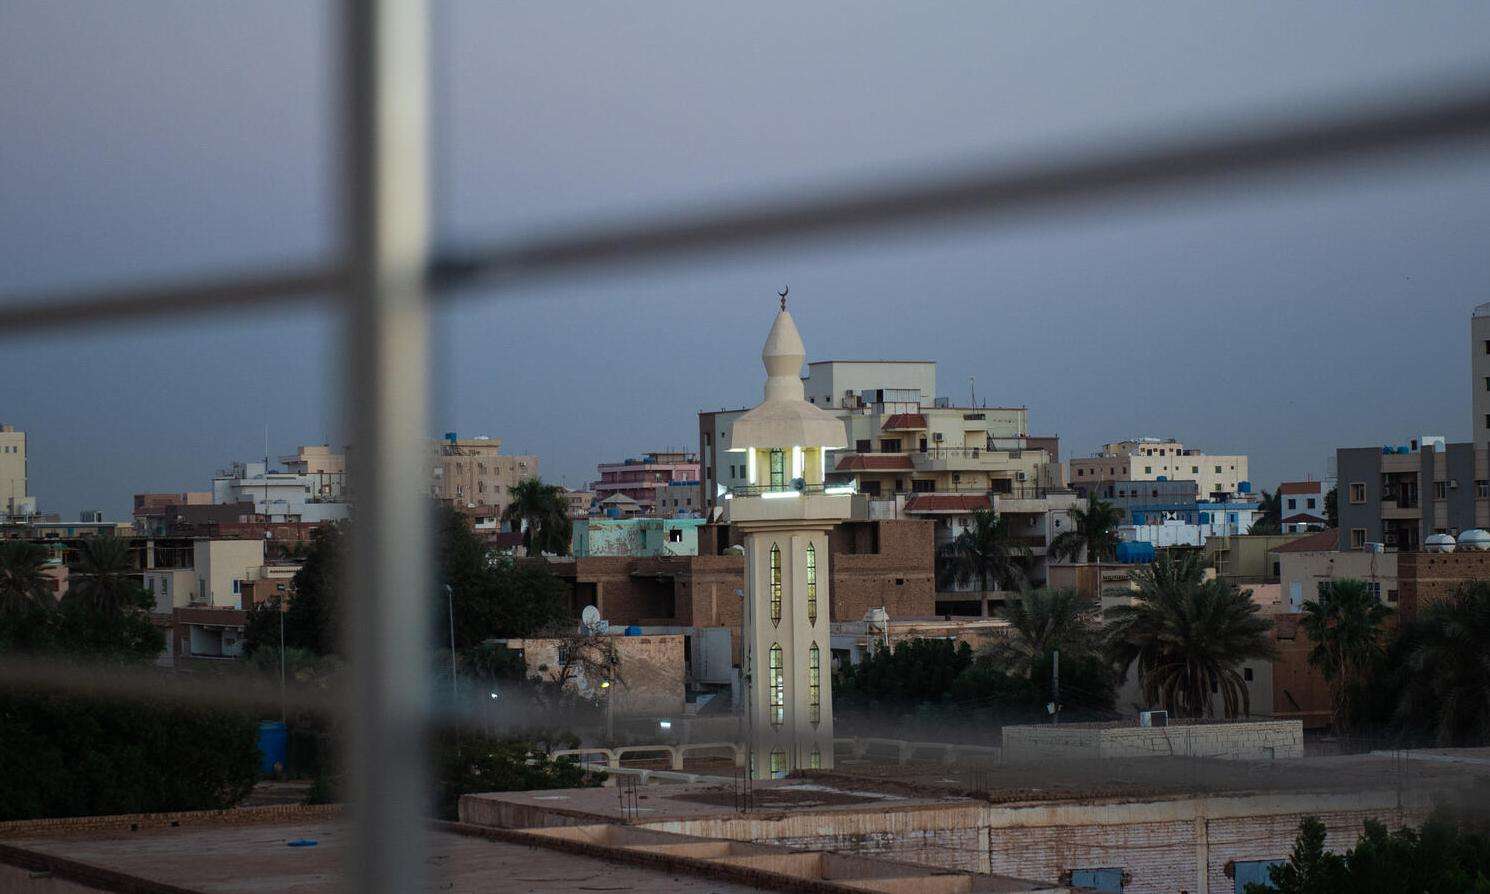 View of an urban landscape in Sudan through the bars of a fence.